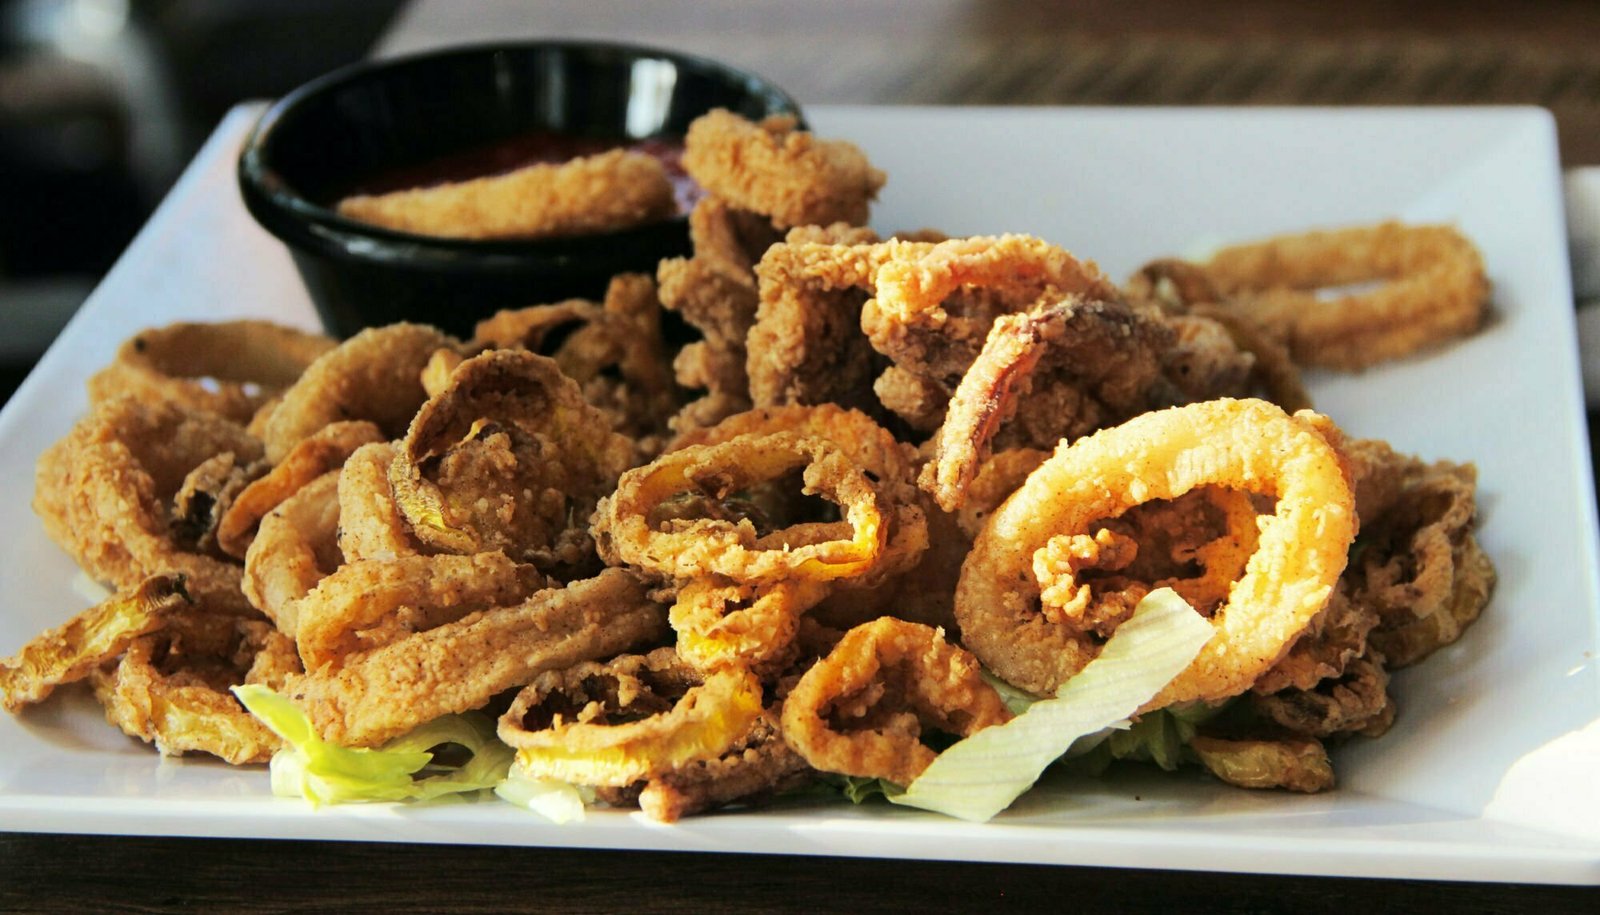 A large square plate sits filled with fried golden calamari